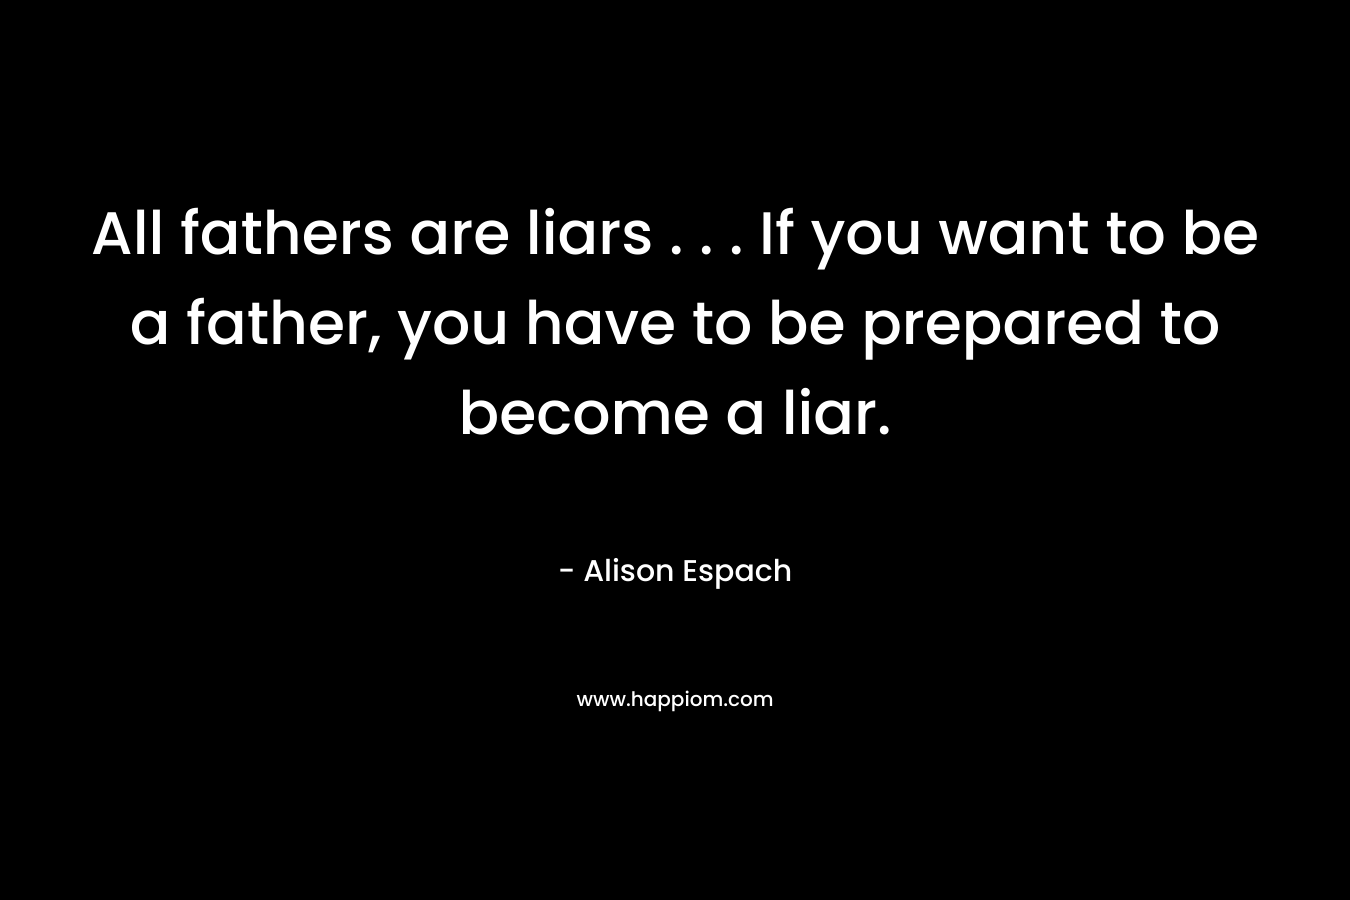 All fathers are liars . . . If you want to be a father, you have to be prepared to become a liar. – Alison Espach